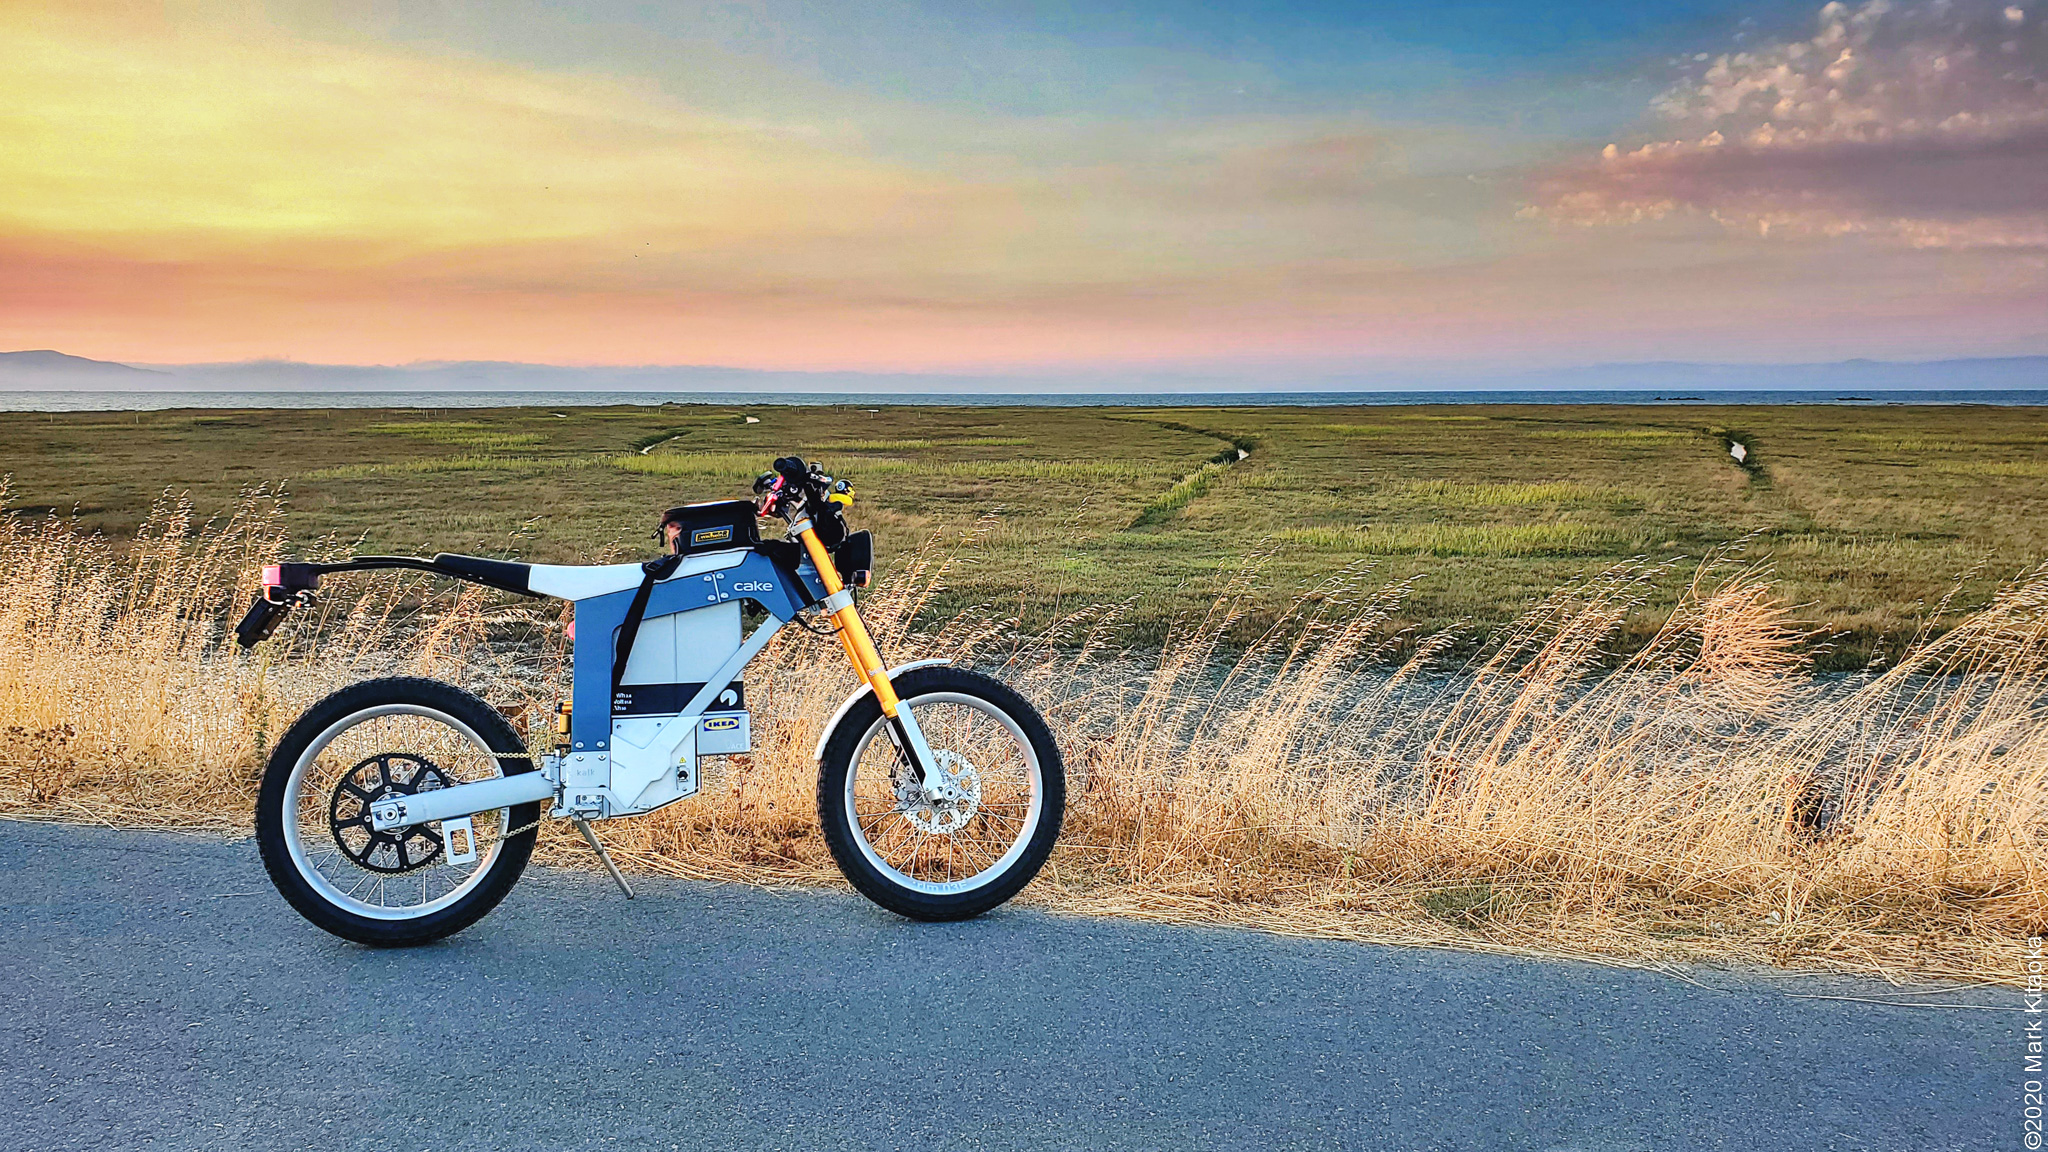 First Look: Off-road electric motorcycle or e-bike? CAKE blur the lines